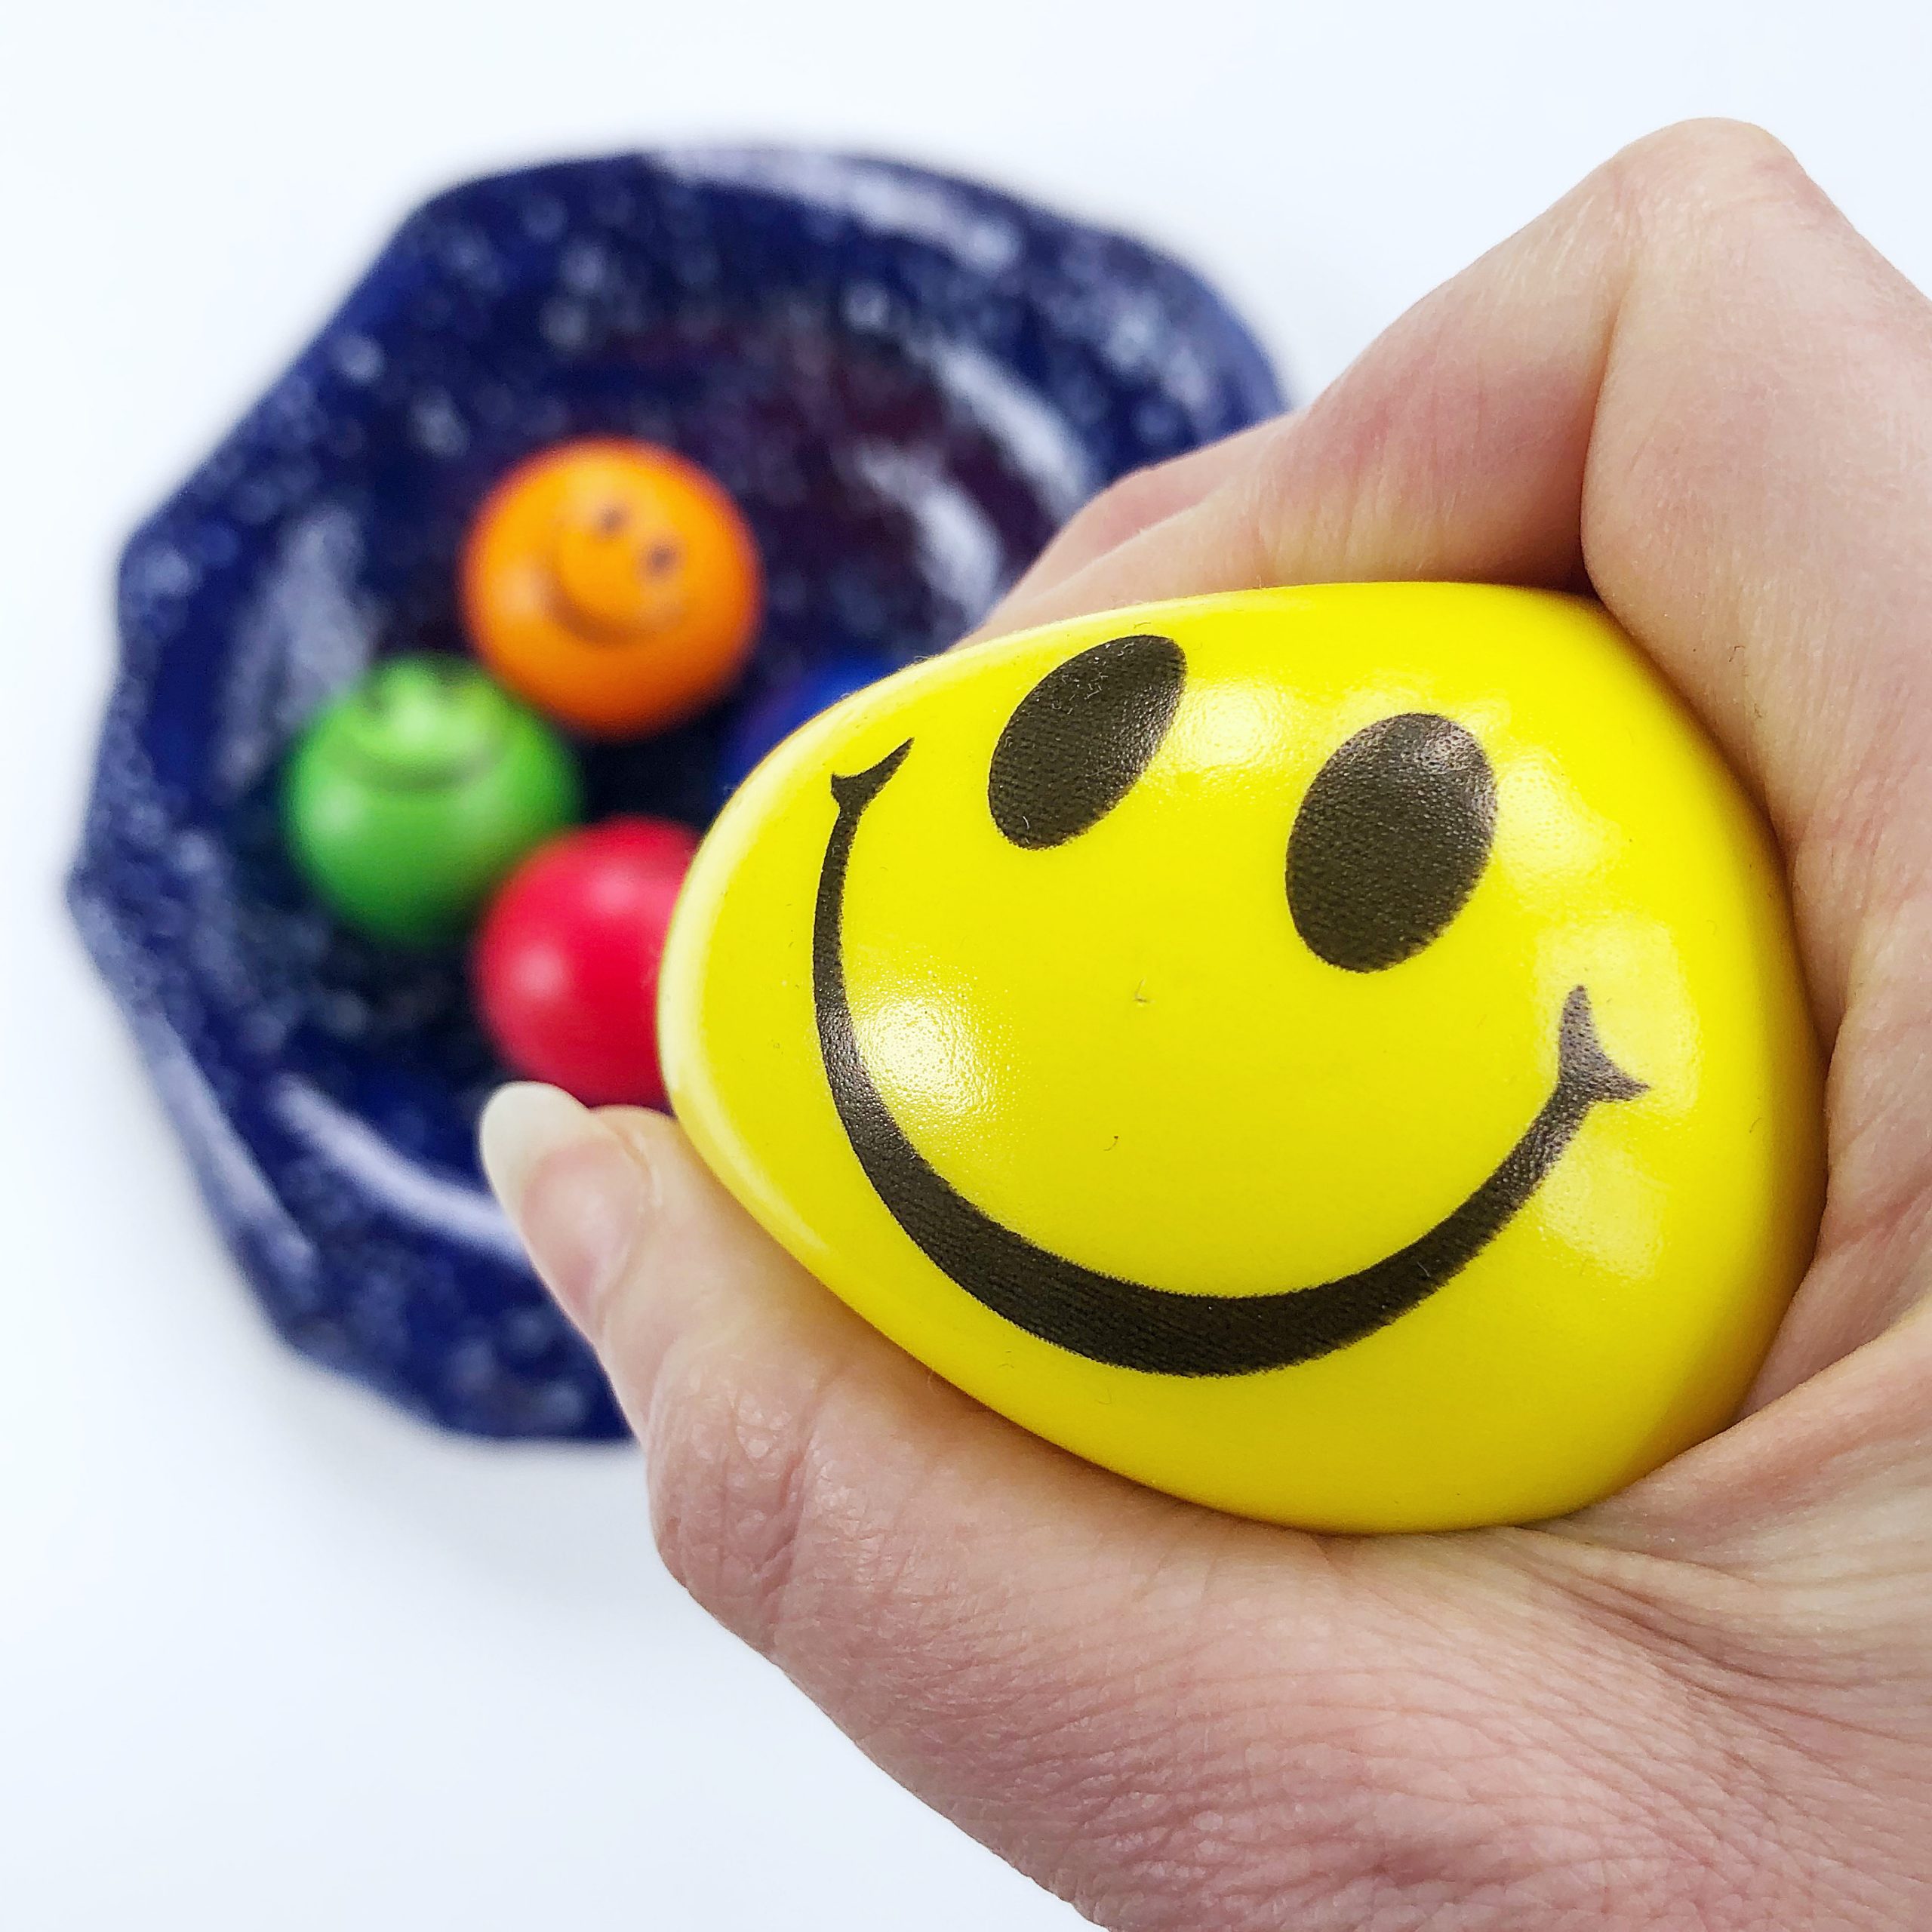 https://www.national5and10.com/wp-content/uploads/2020/04/Smiley-Face-Stress-Ball-2-scaled.jpg